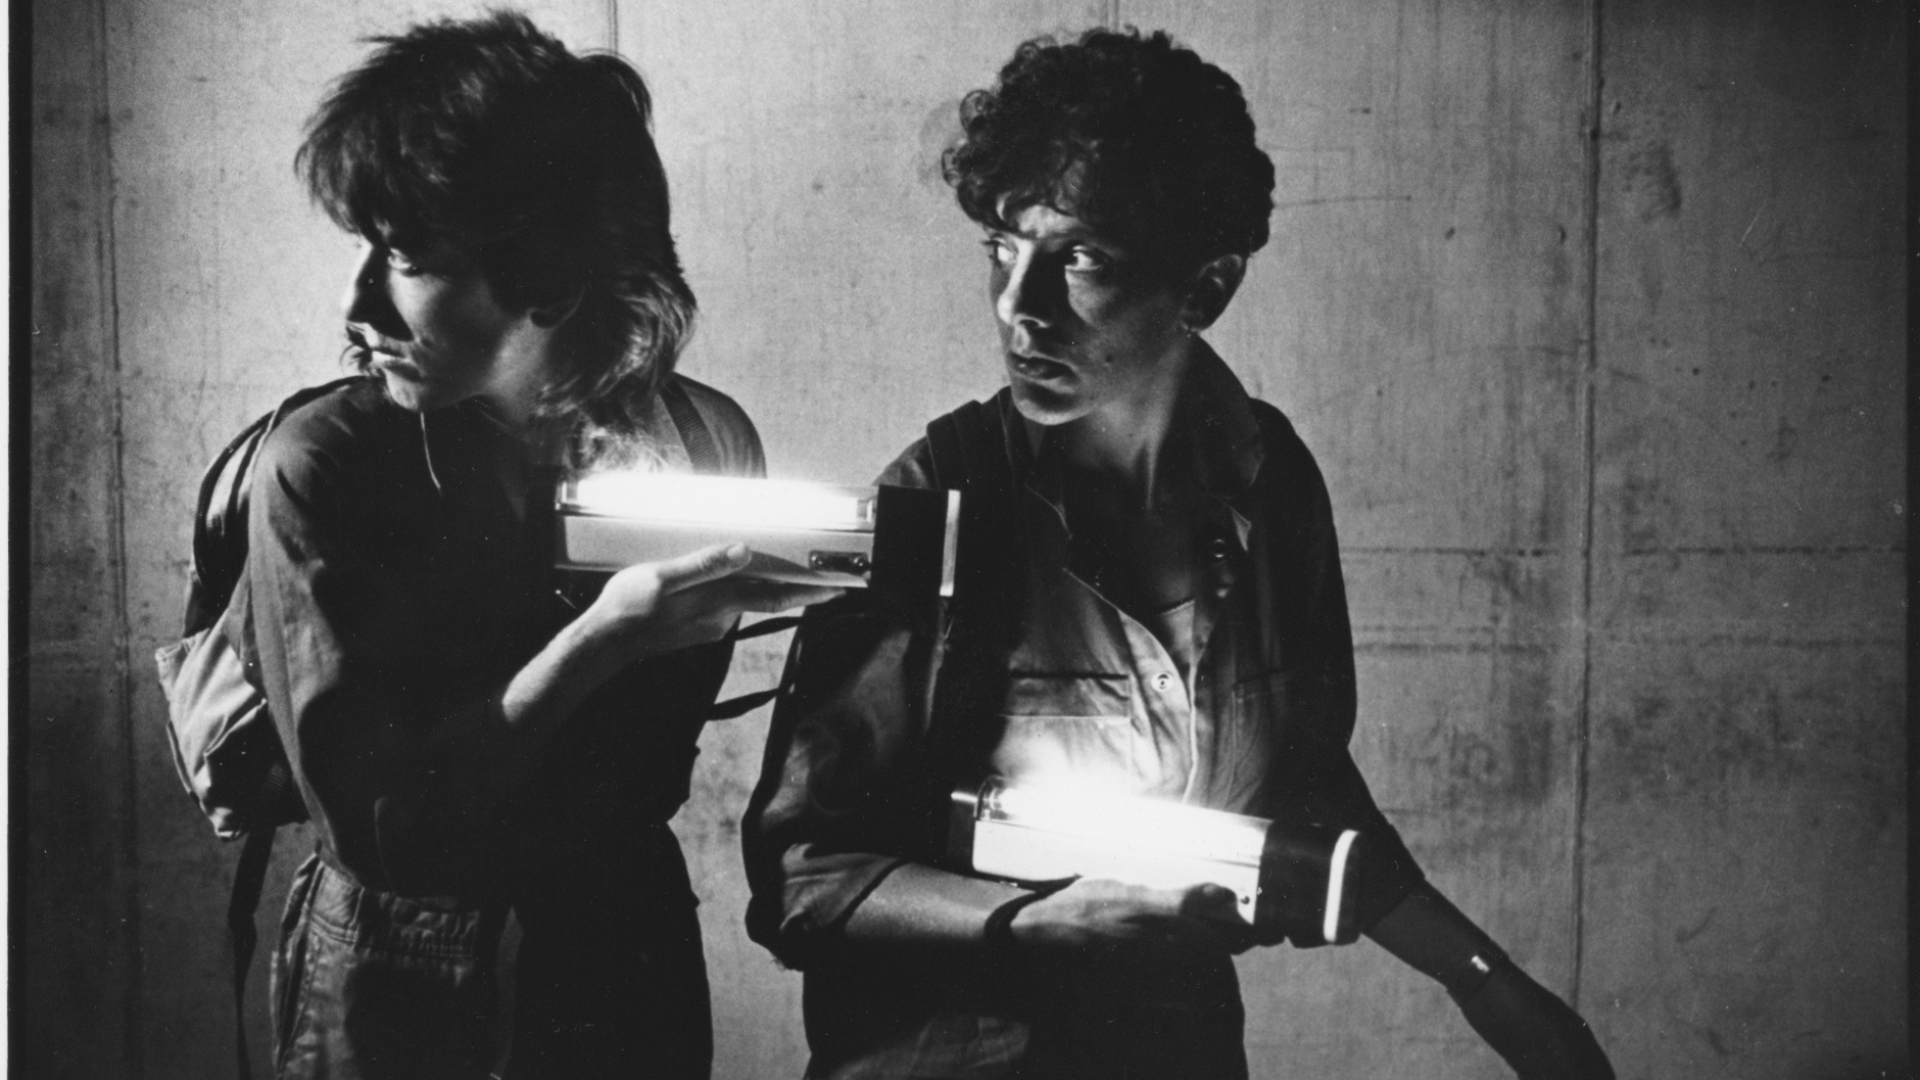 Film still from 'On Guard'. In black and white, two people hold flashlights and walk through a cement corridor.